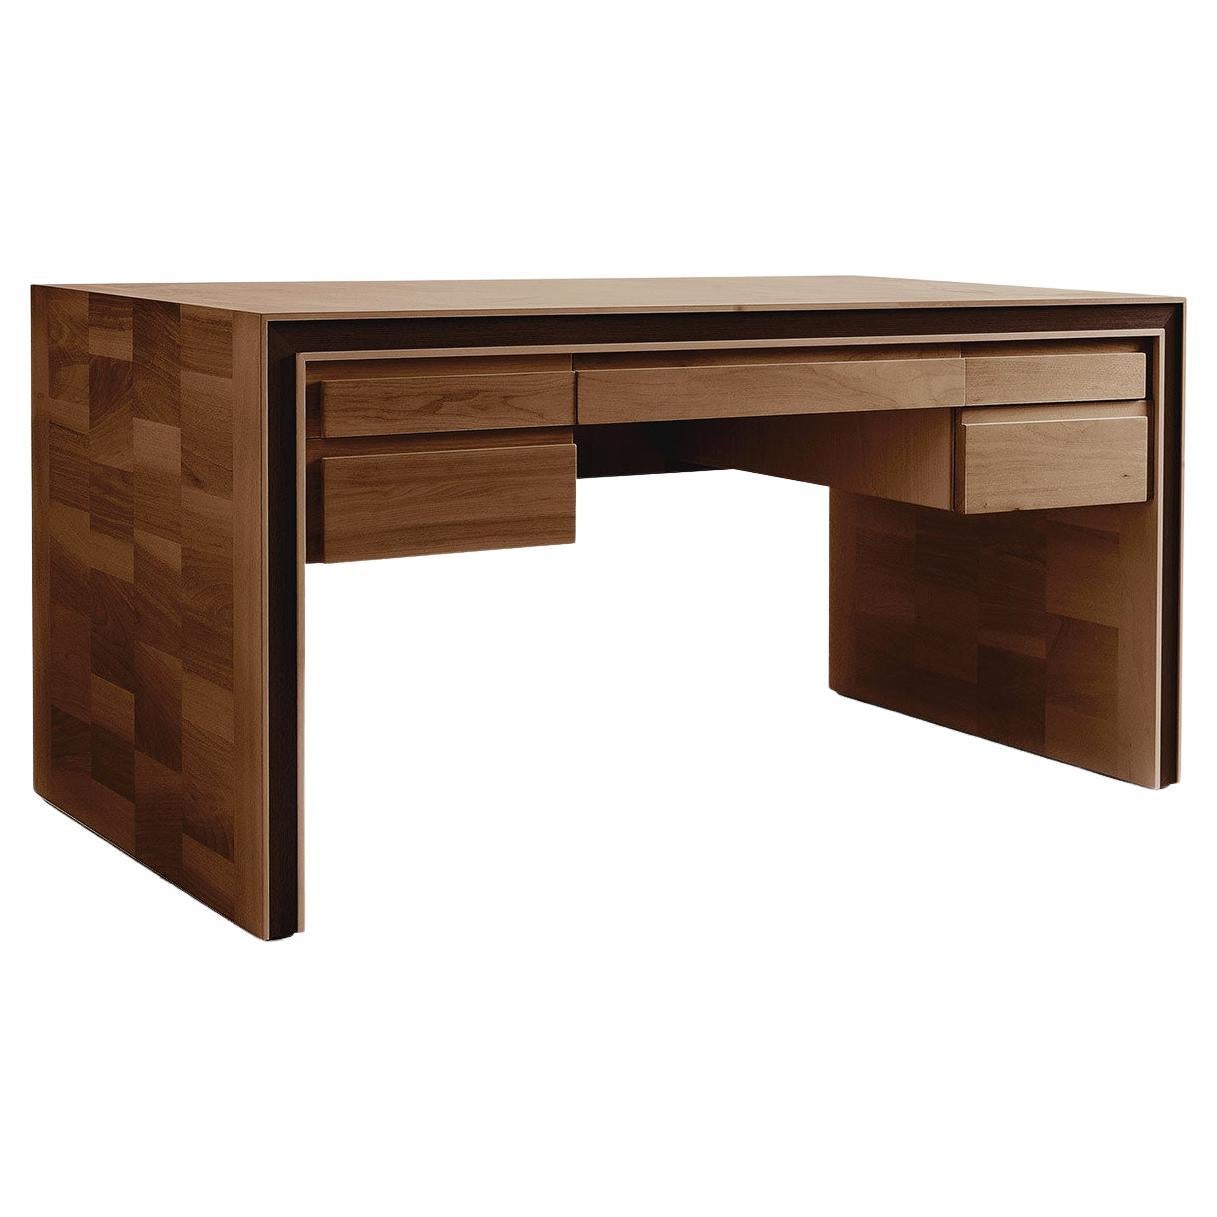 Gentile Solid Wood Desk, Walnut in Hand-Made Natural Finish, Contemporary For Sale